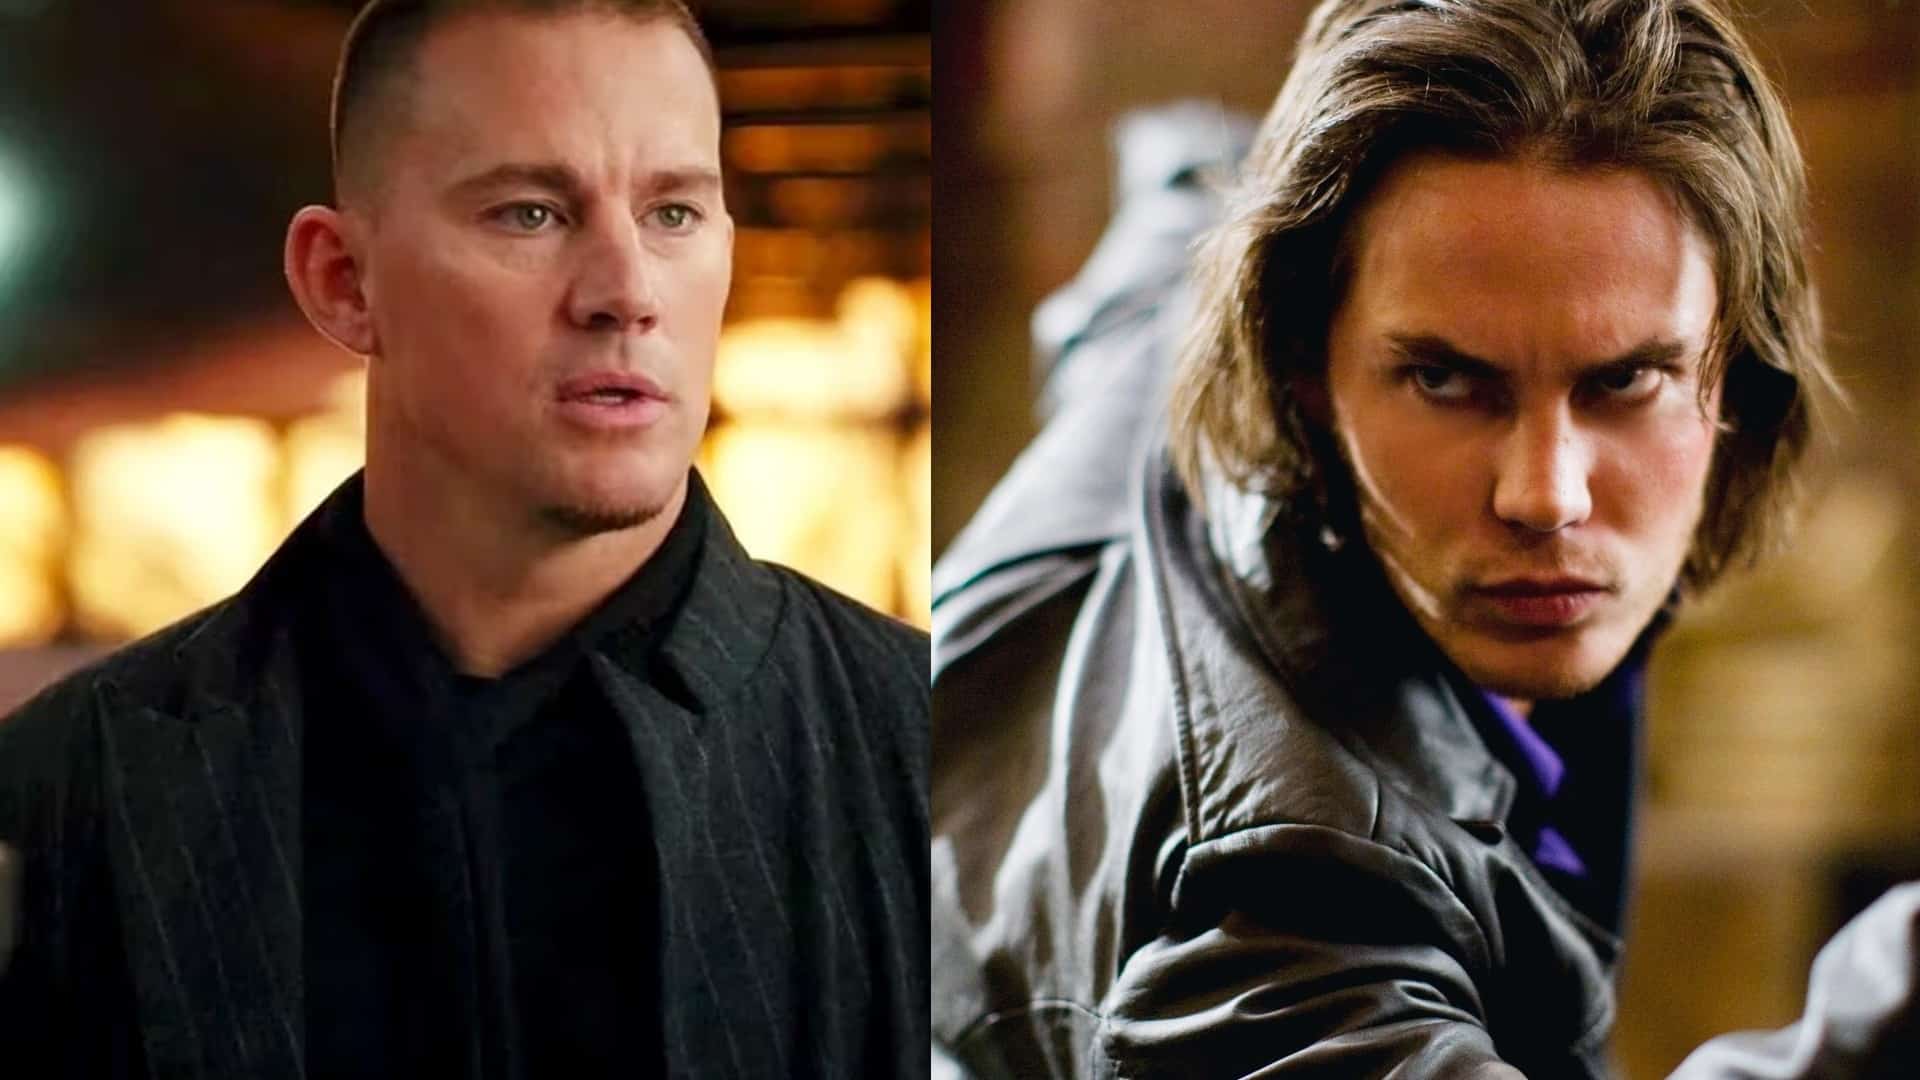 Deadpool 3: Will Channing Tatum's Gambit Cameo in the Movie?